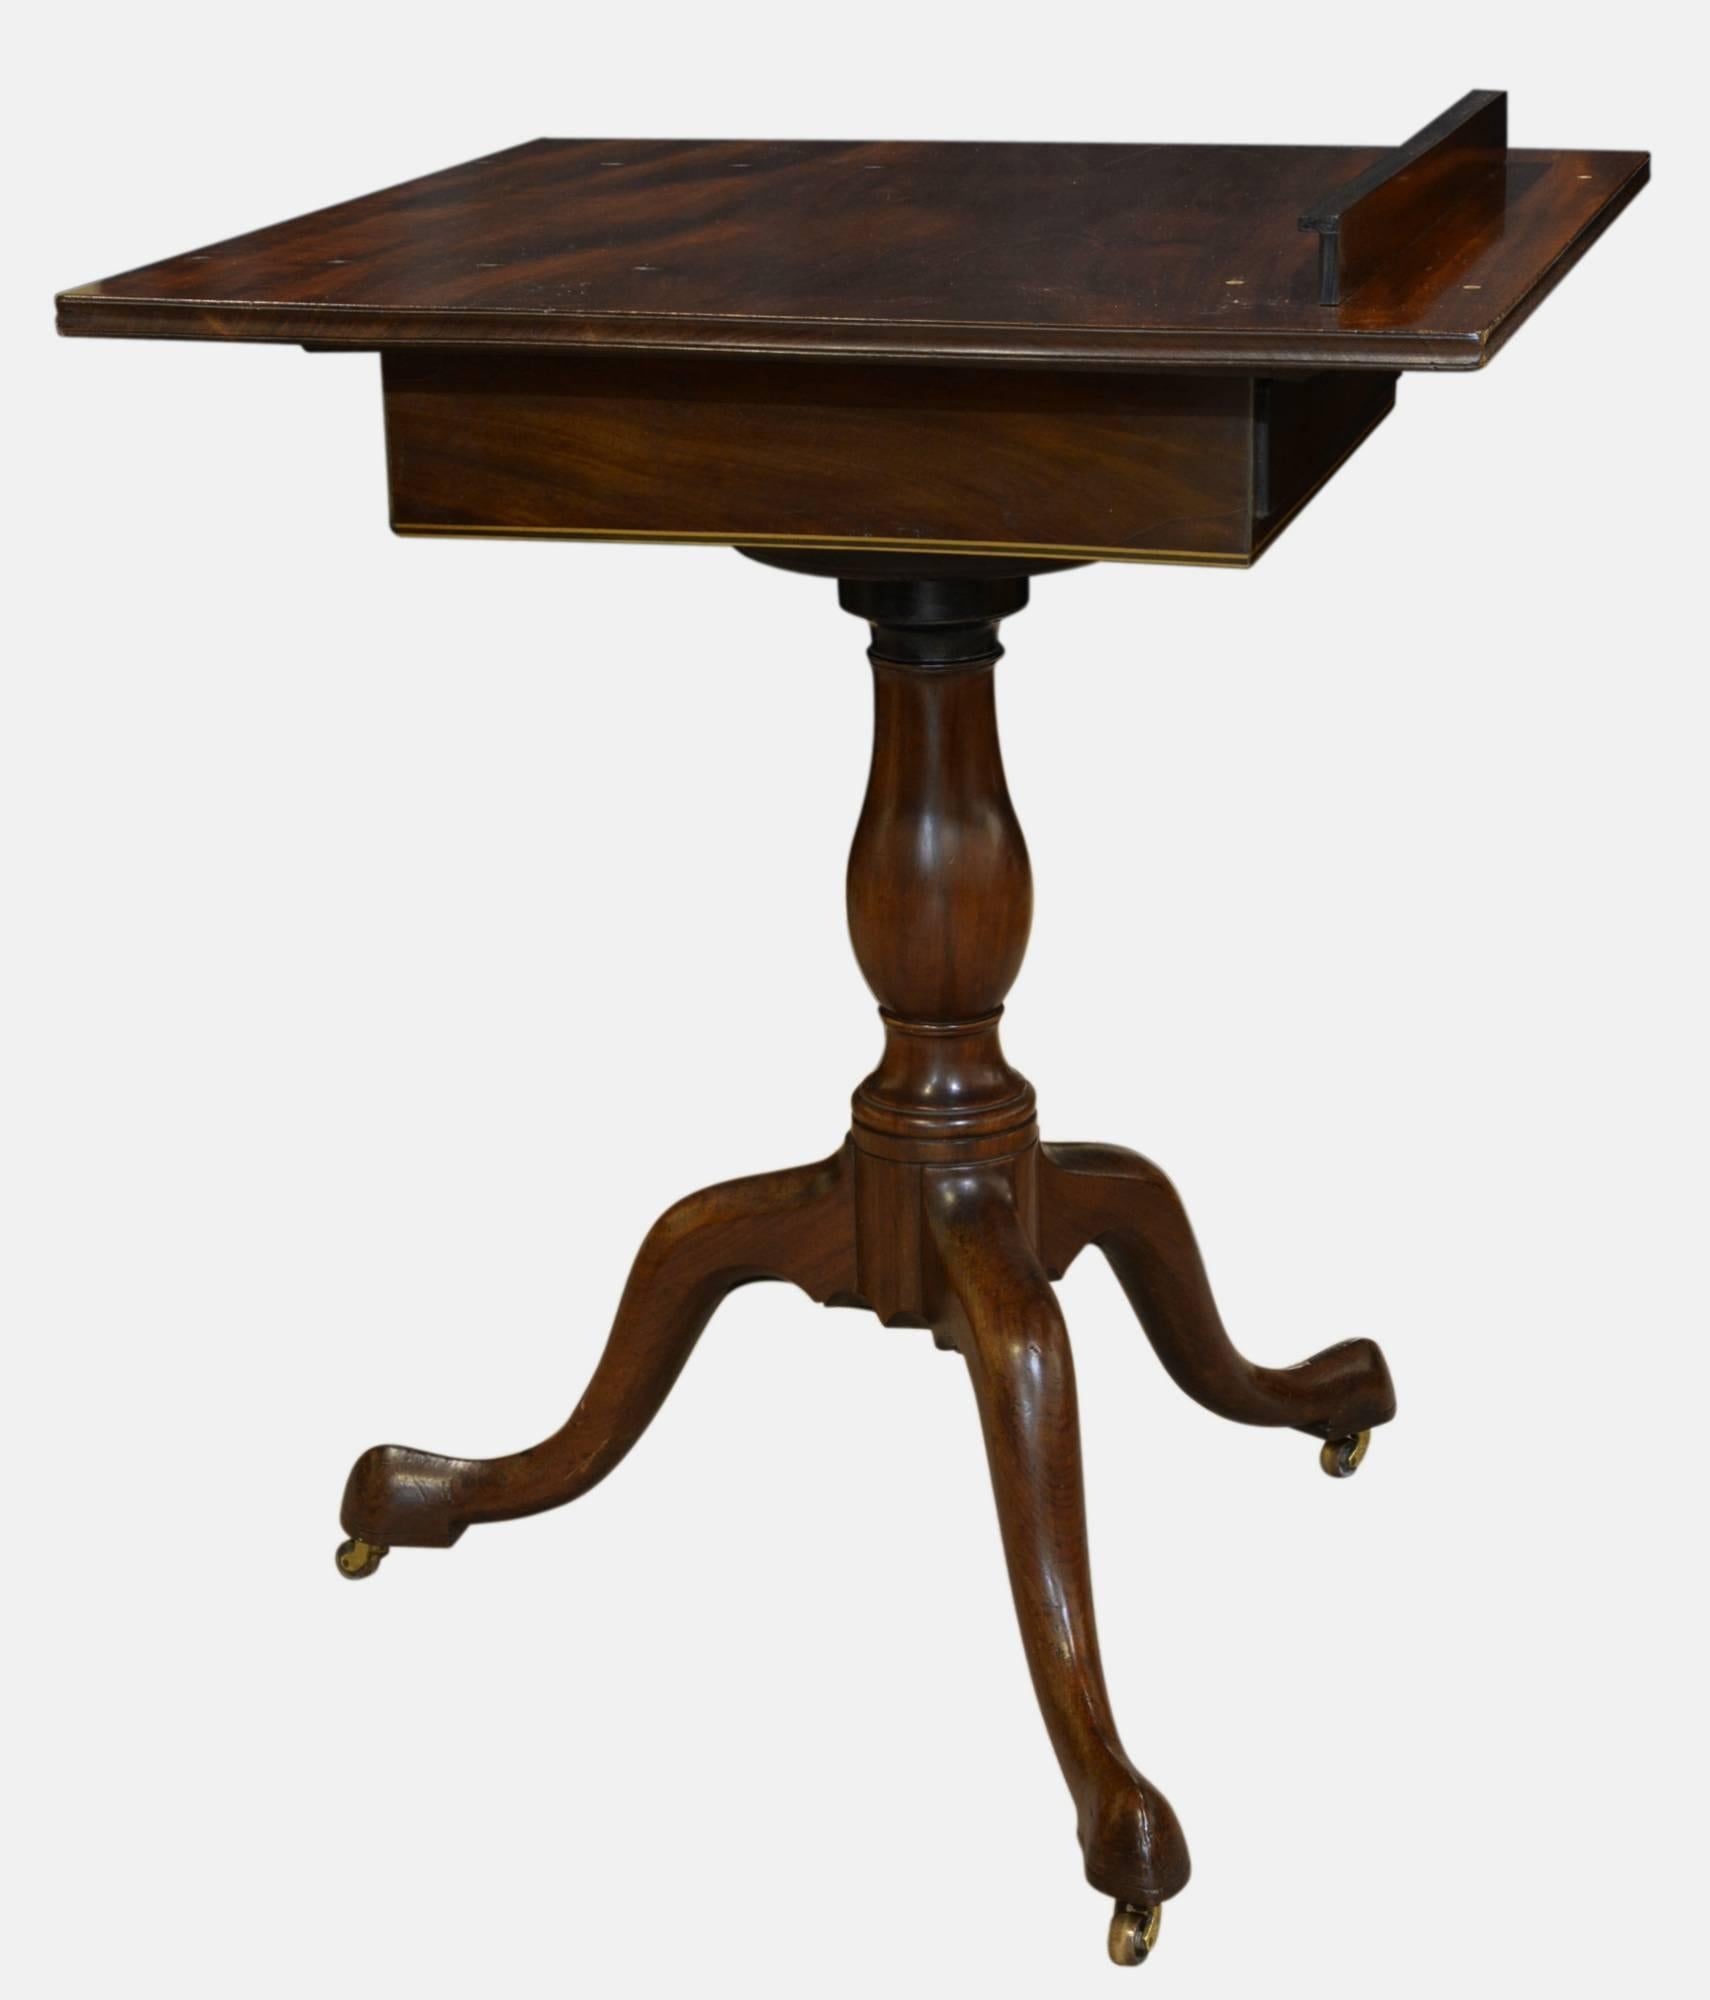 18th century mahogany artists or reading table with boxwood stringing and drawer,

circa 1760.